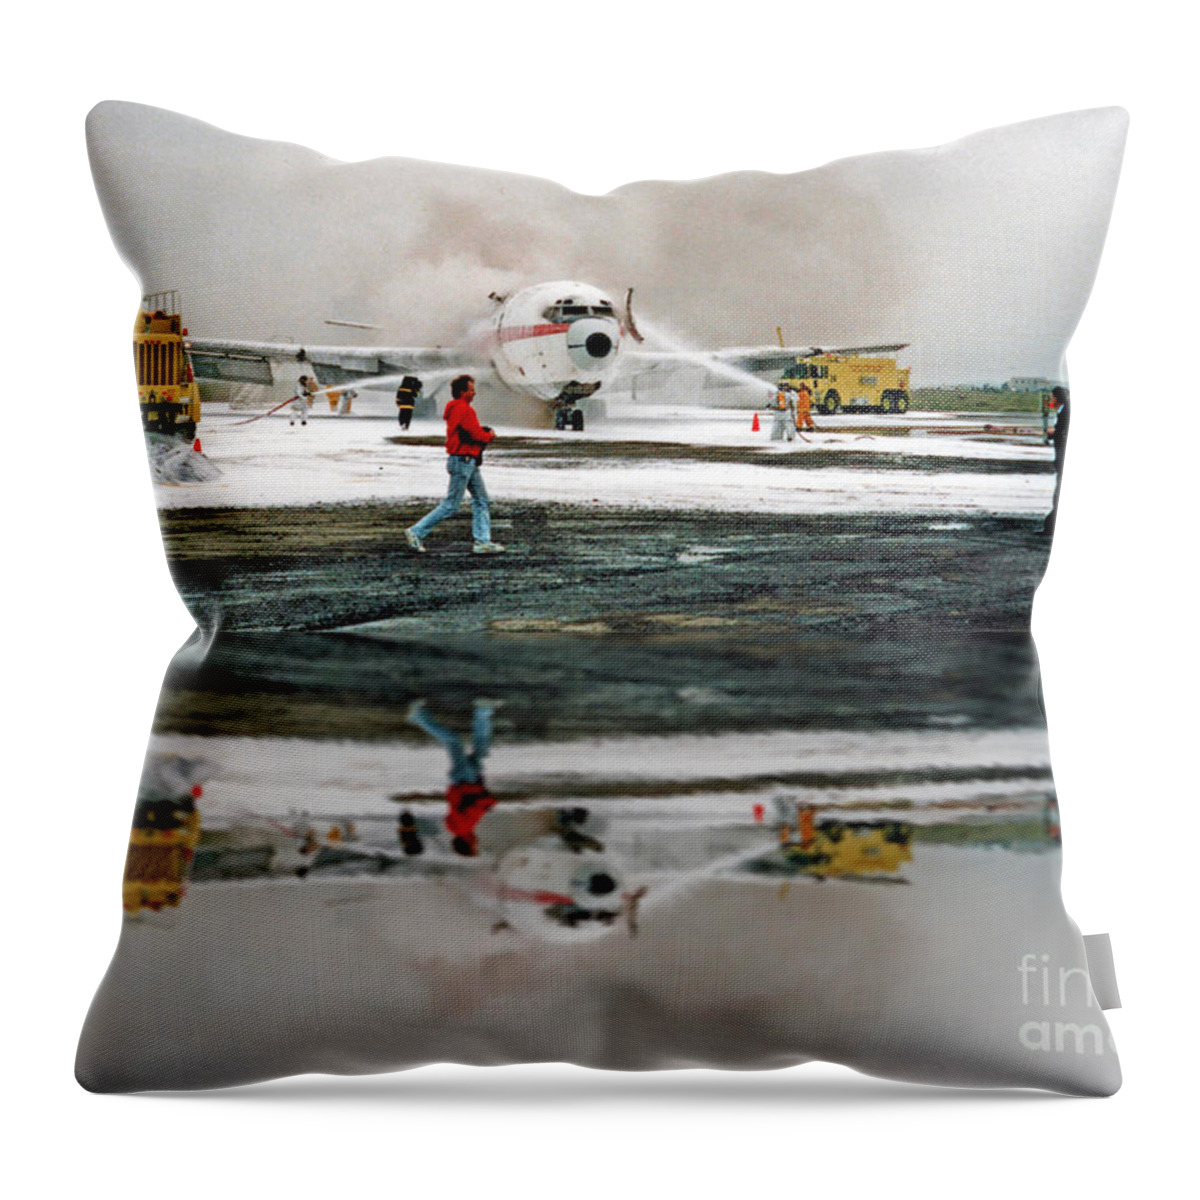 Airplane Crash Drill Throw Pillow featuring the photograph Airplane Crash Drill Landscape Altered Version by Jim Fitzpatrick